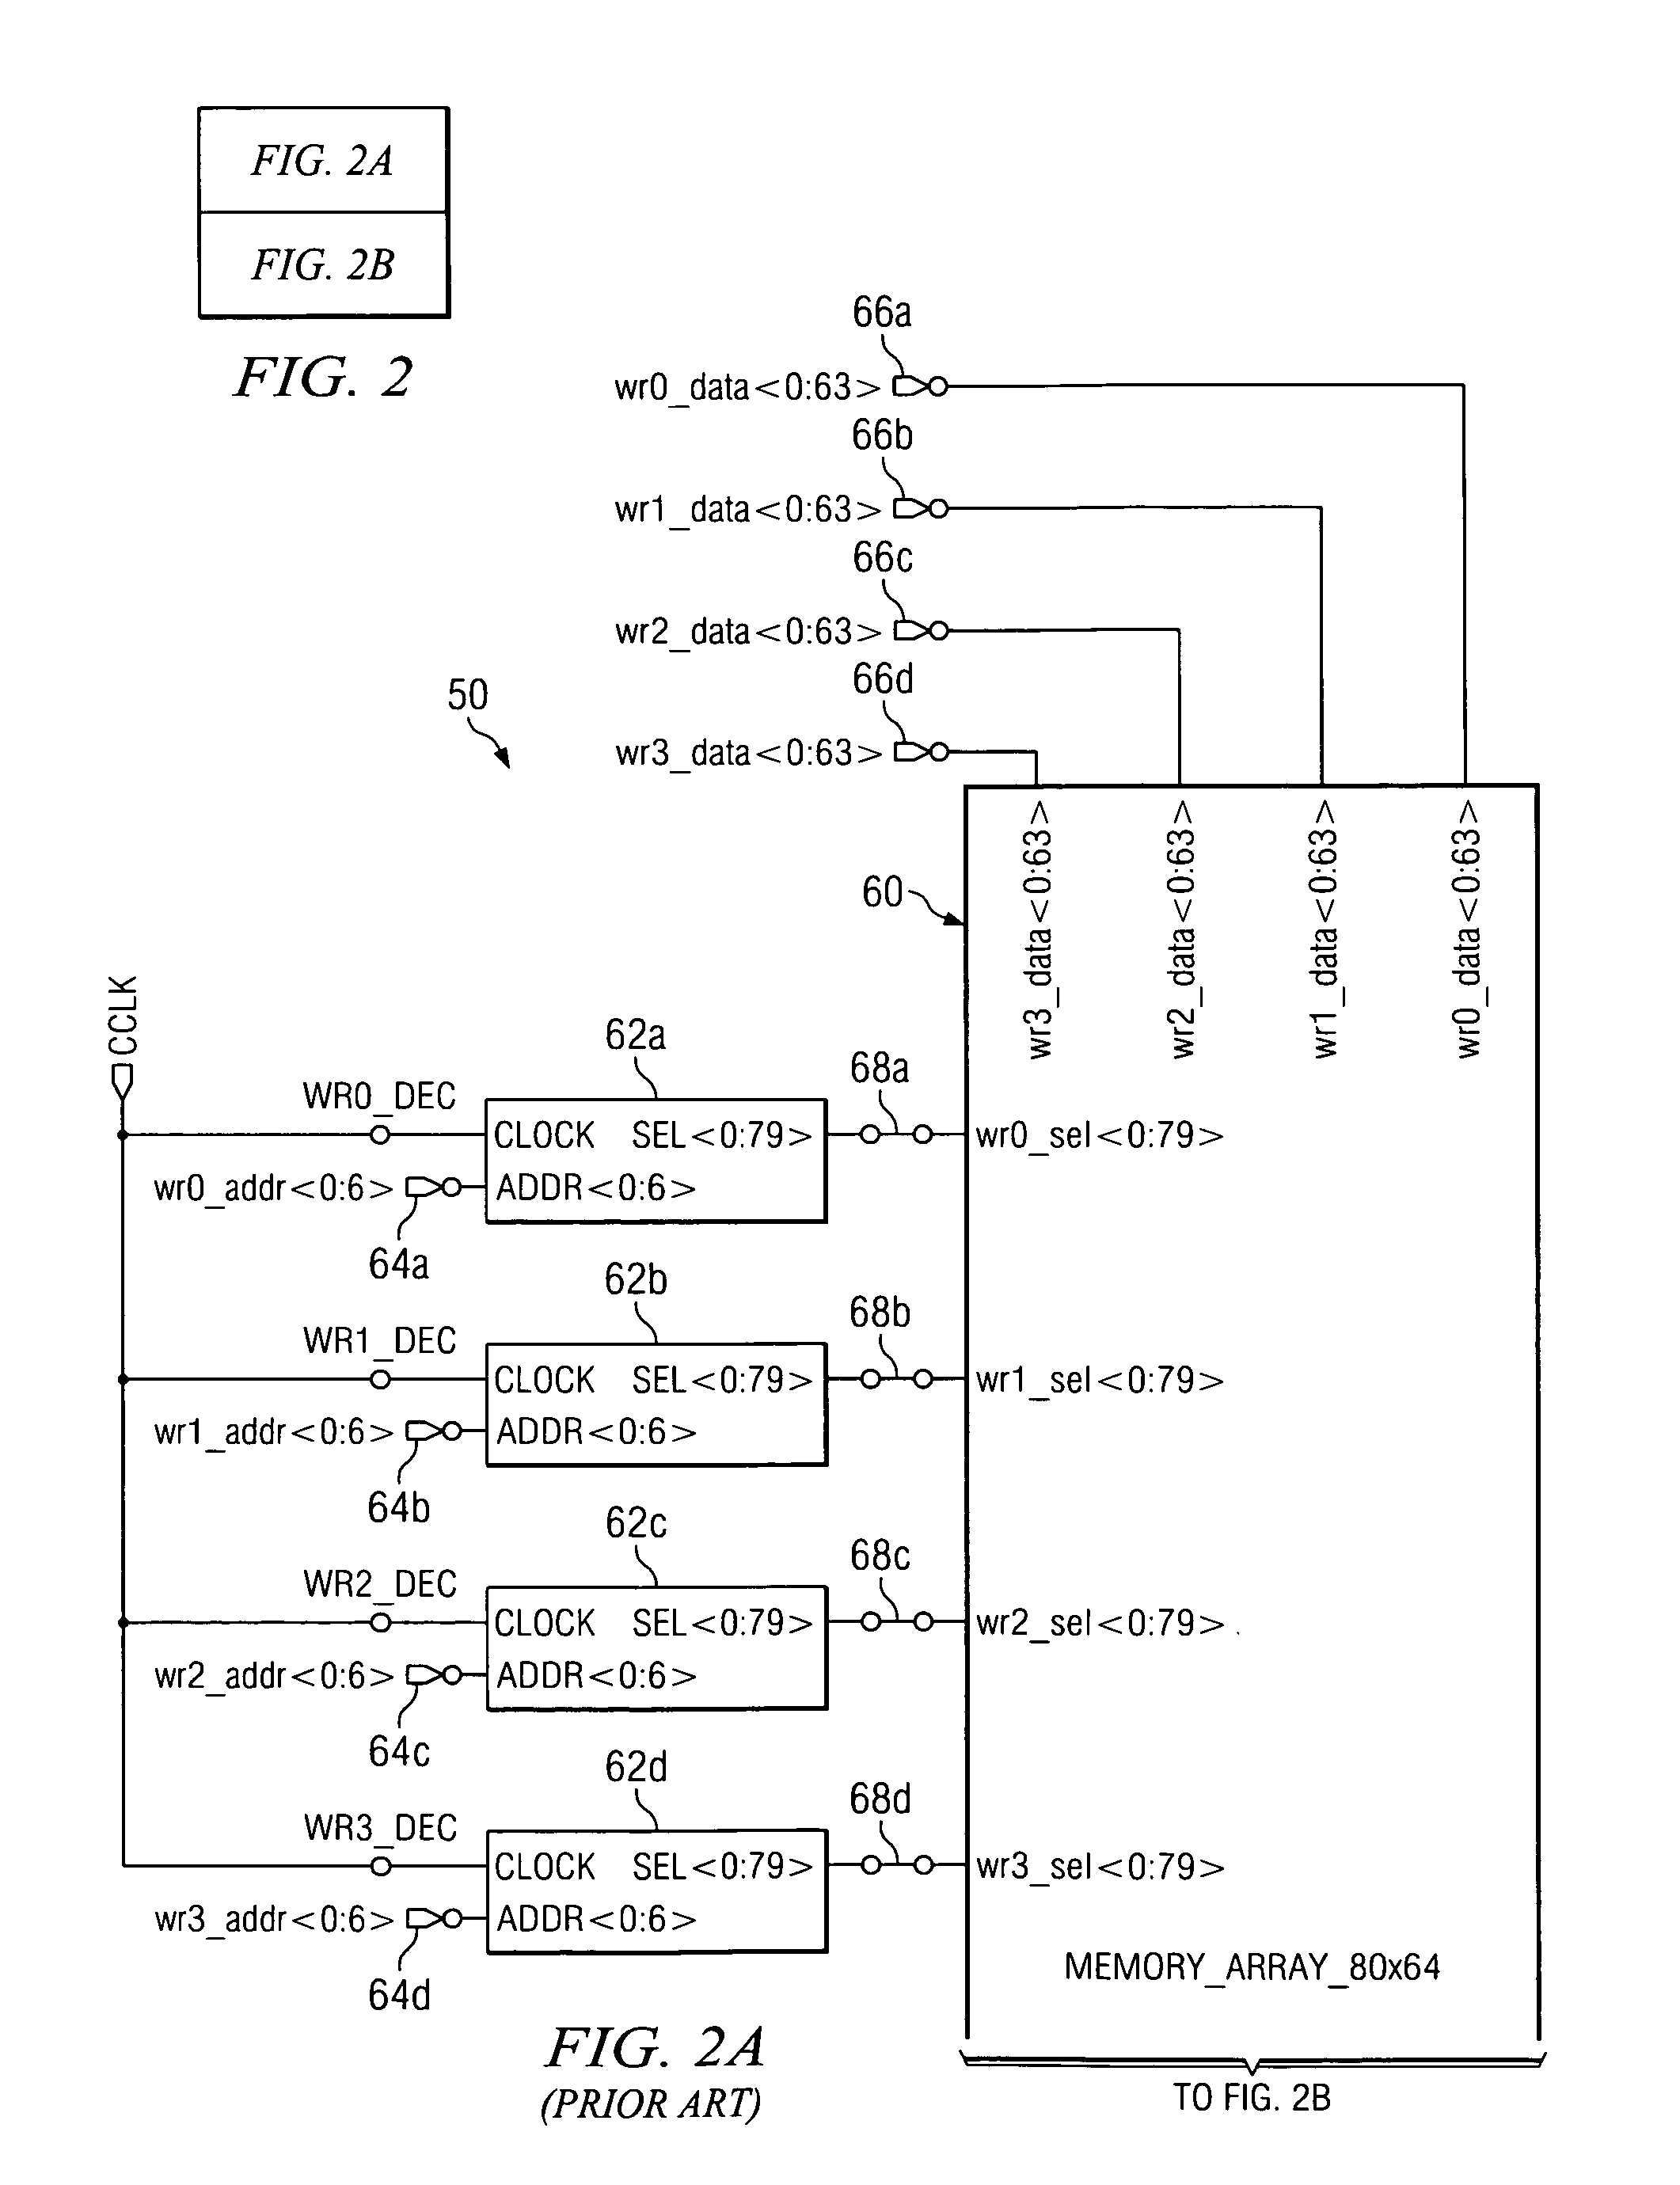 Apparatus and method for speeding up access time of a large register file with wrap capability